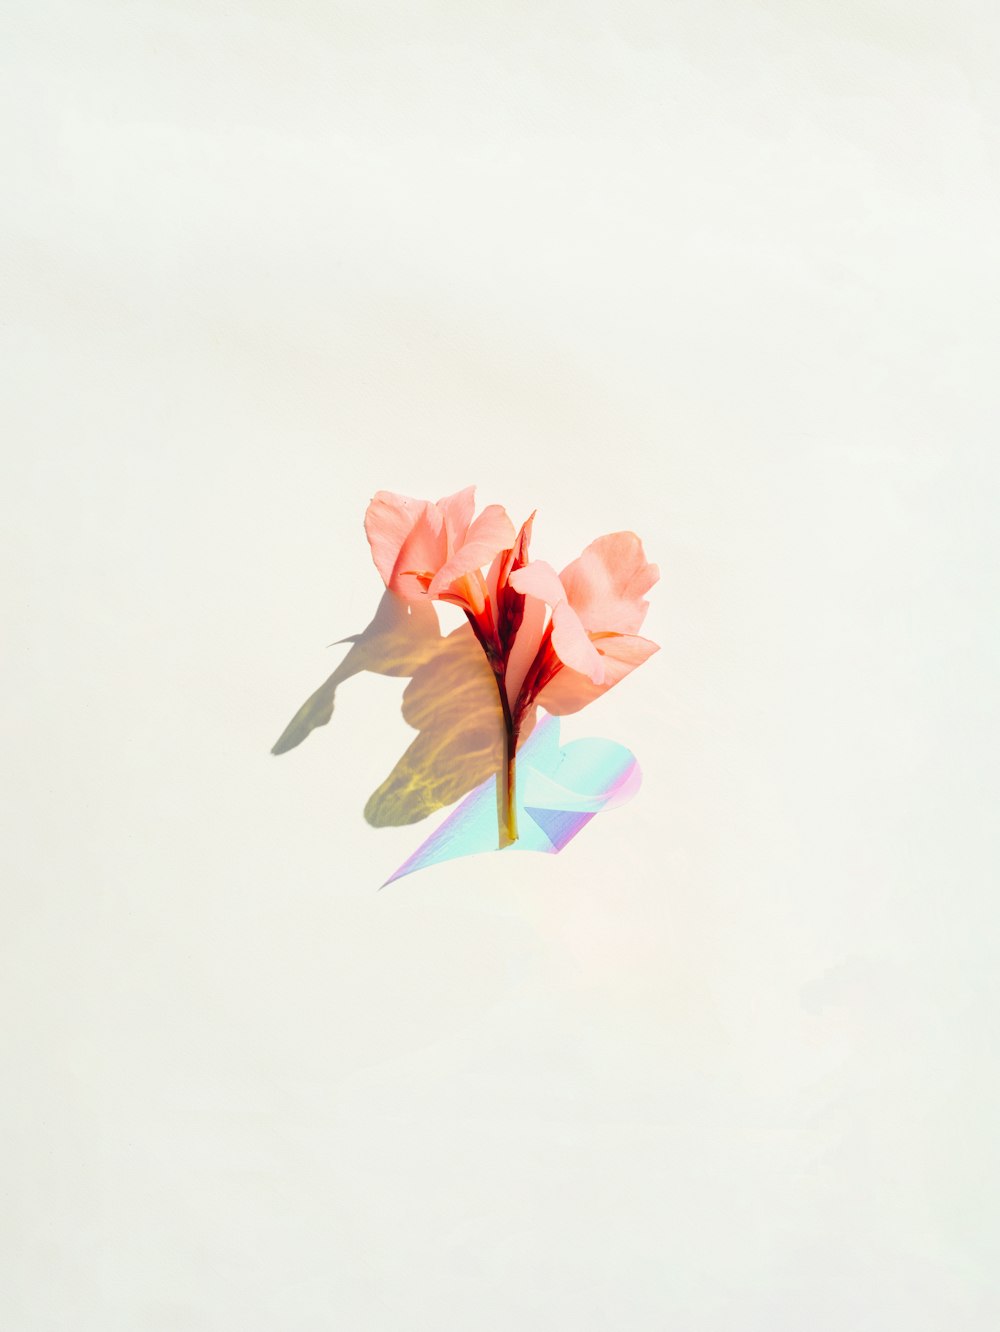 a single pink flower on a white background